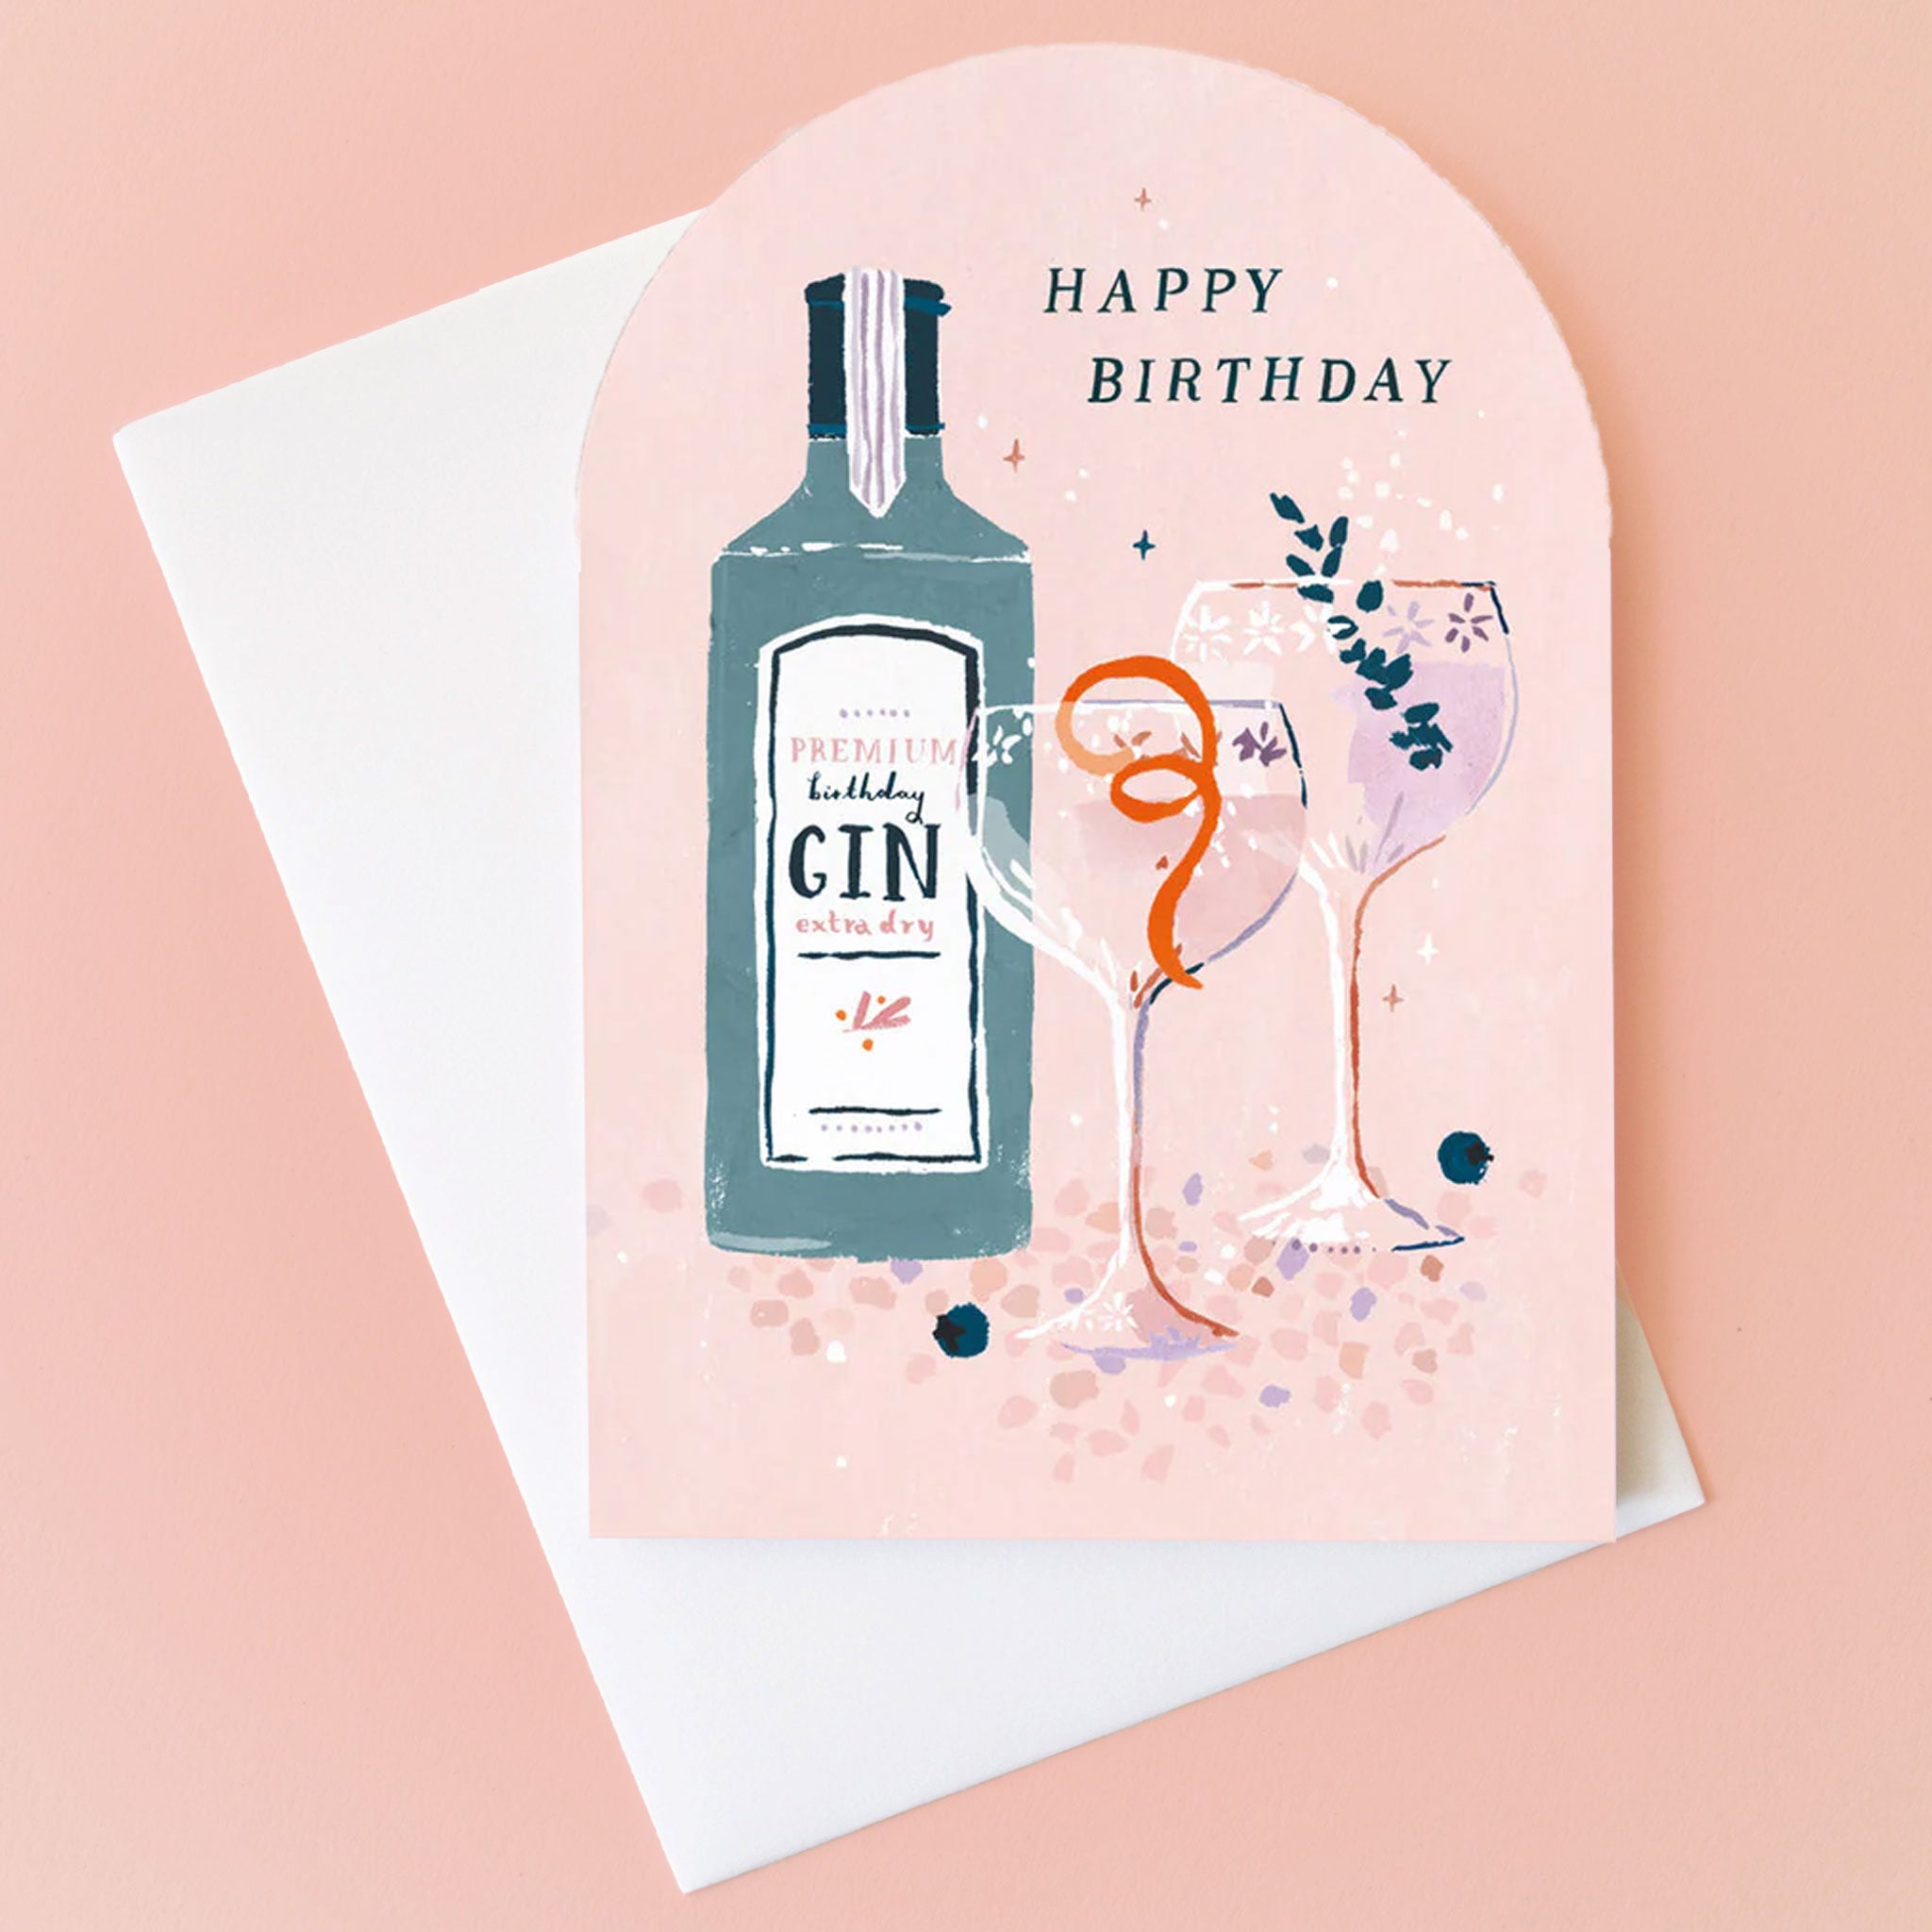 On a peachy background is an arched card with an illustration of cocktail glasses and a bottle of gin and text that reads, "Happy Birthday". 